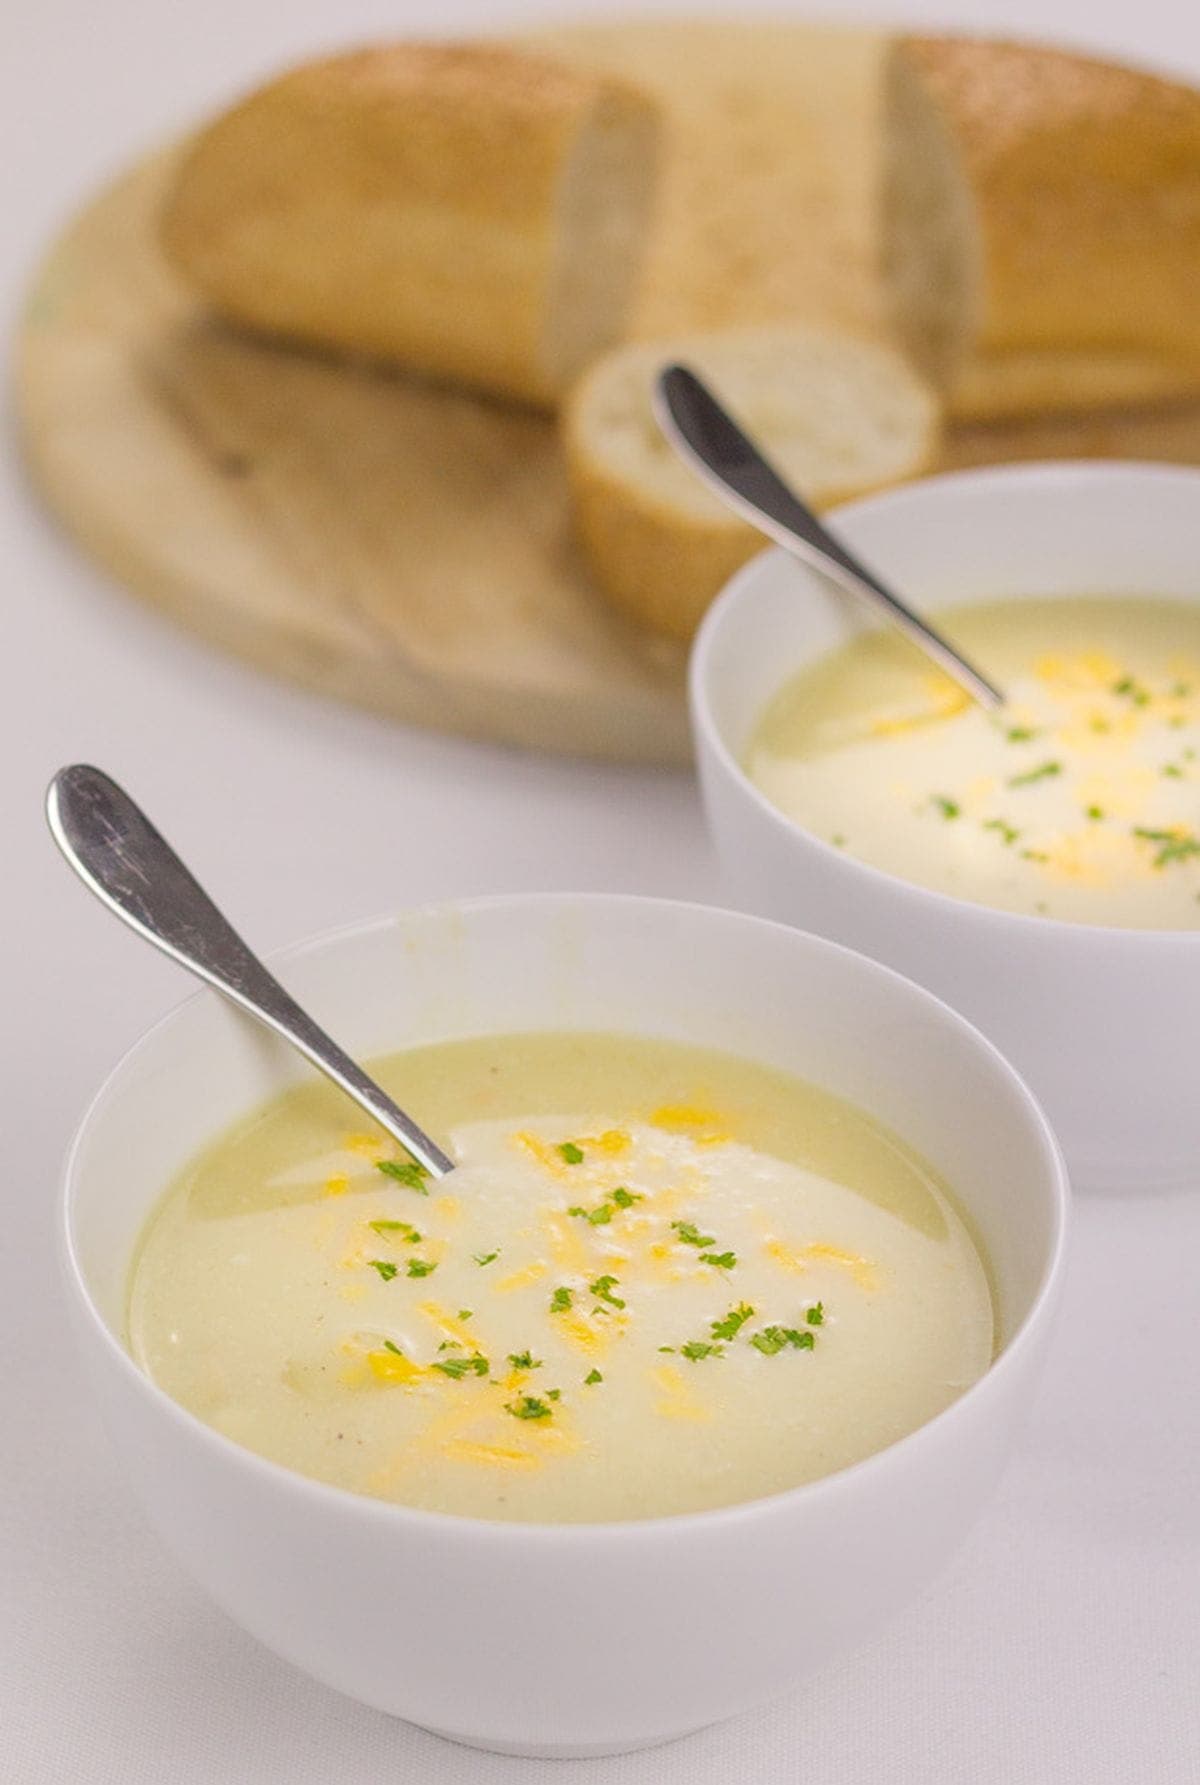 Two bowls of cheesy cauliflower and white bean soup with spoons in. One in front of the other a bread board with sliced baguette on in the background.